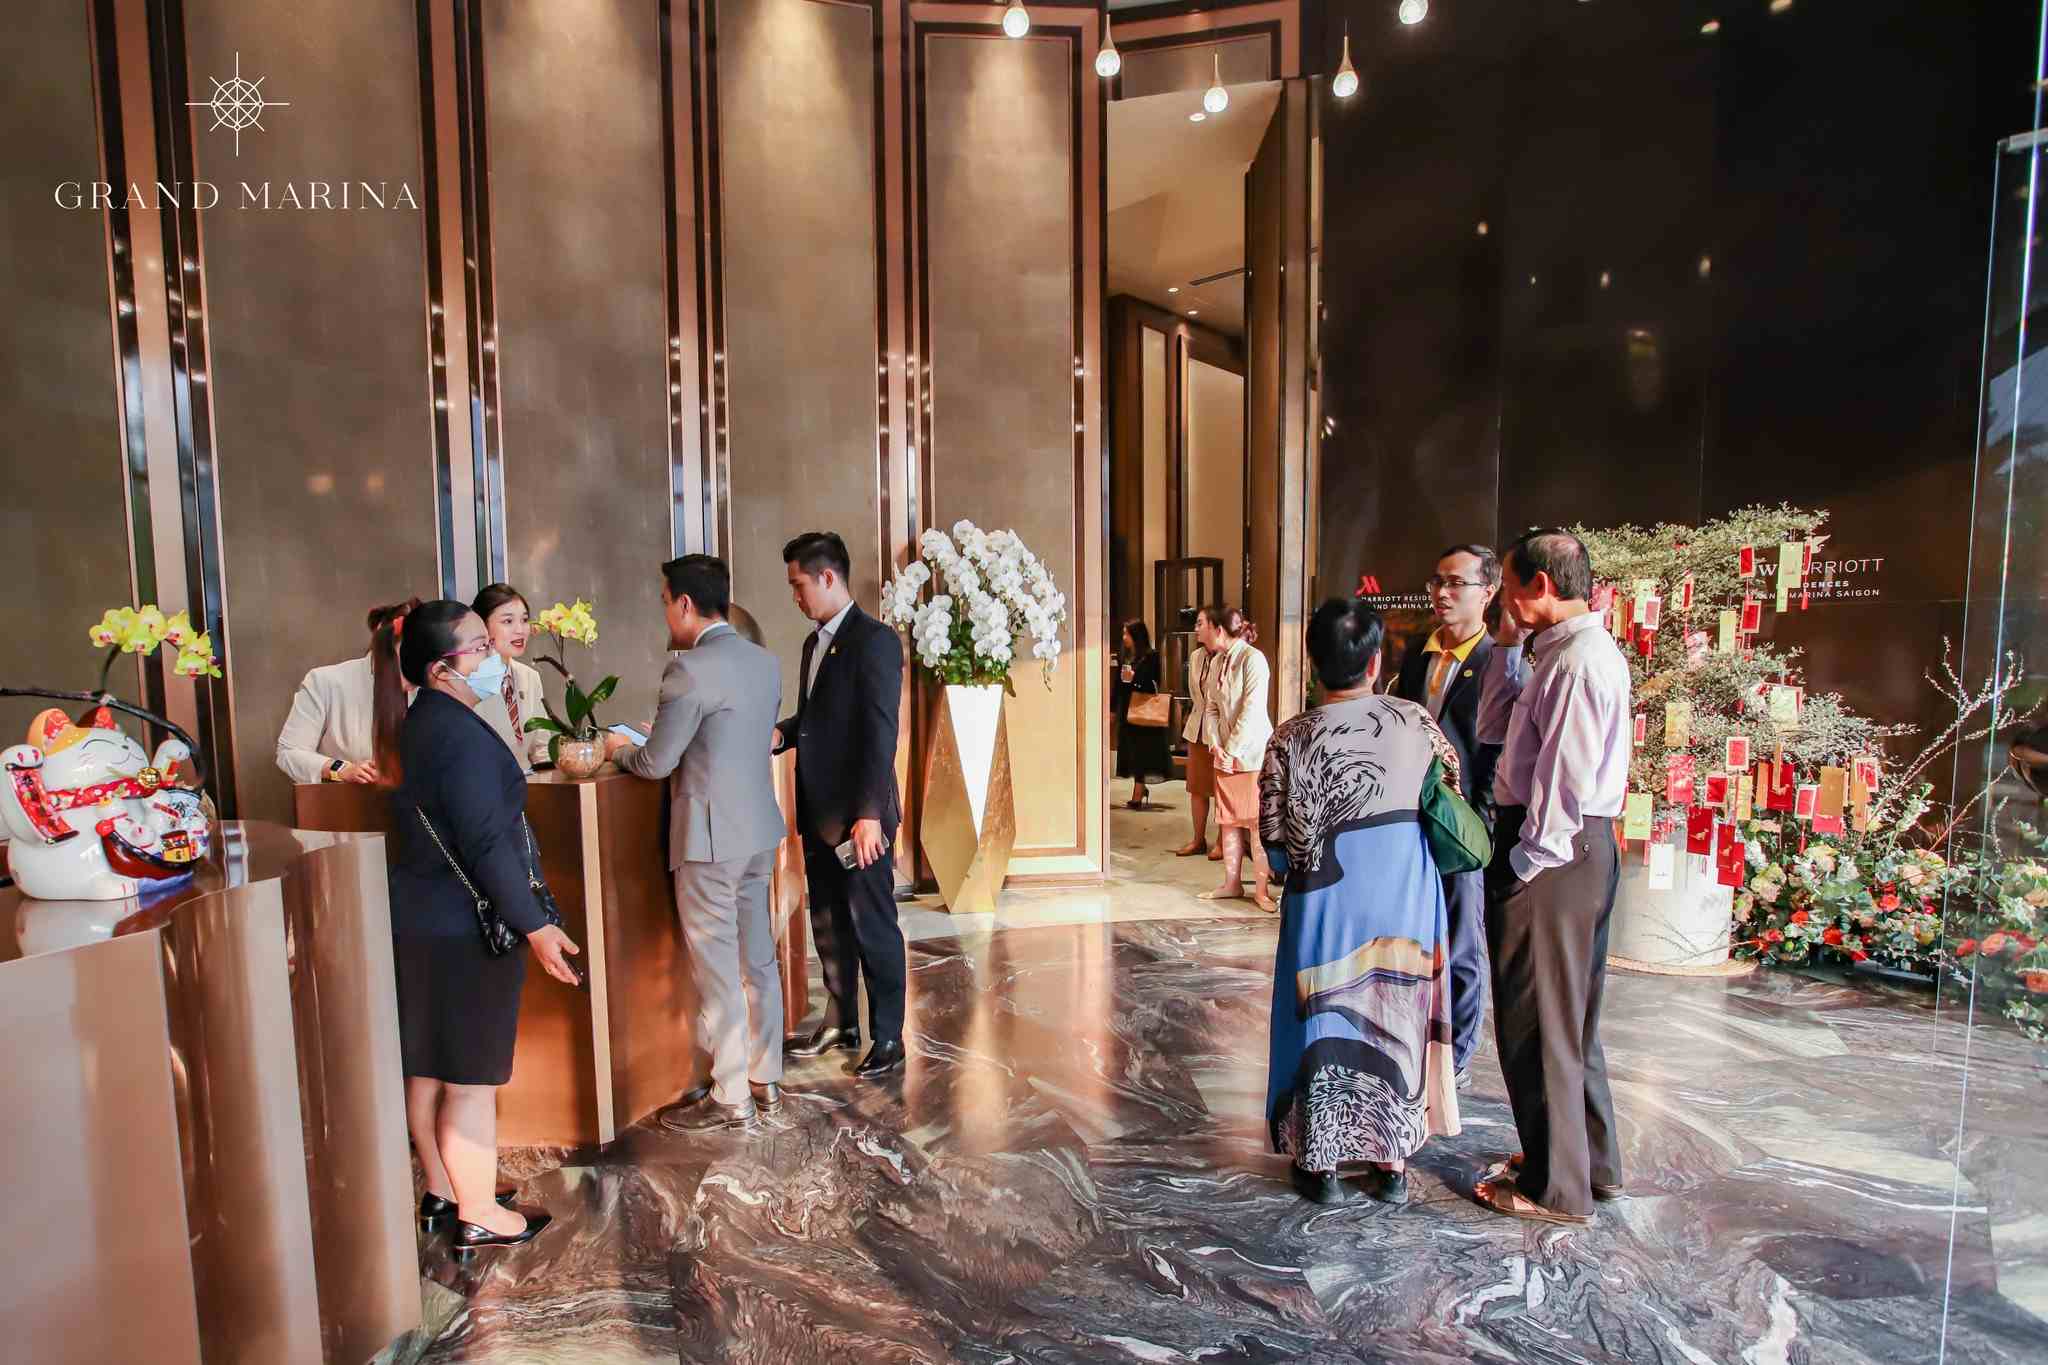 Customers are eager to reap good fortune in the Grand Marina Gallery brand space